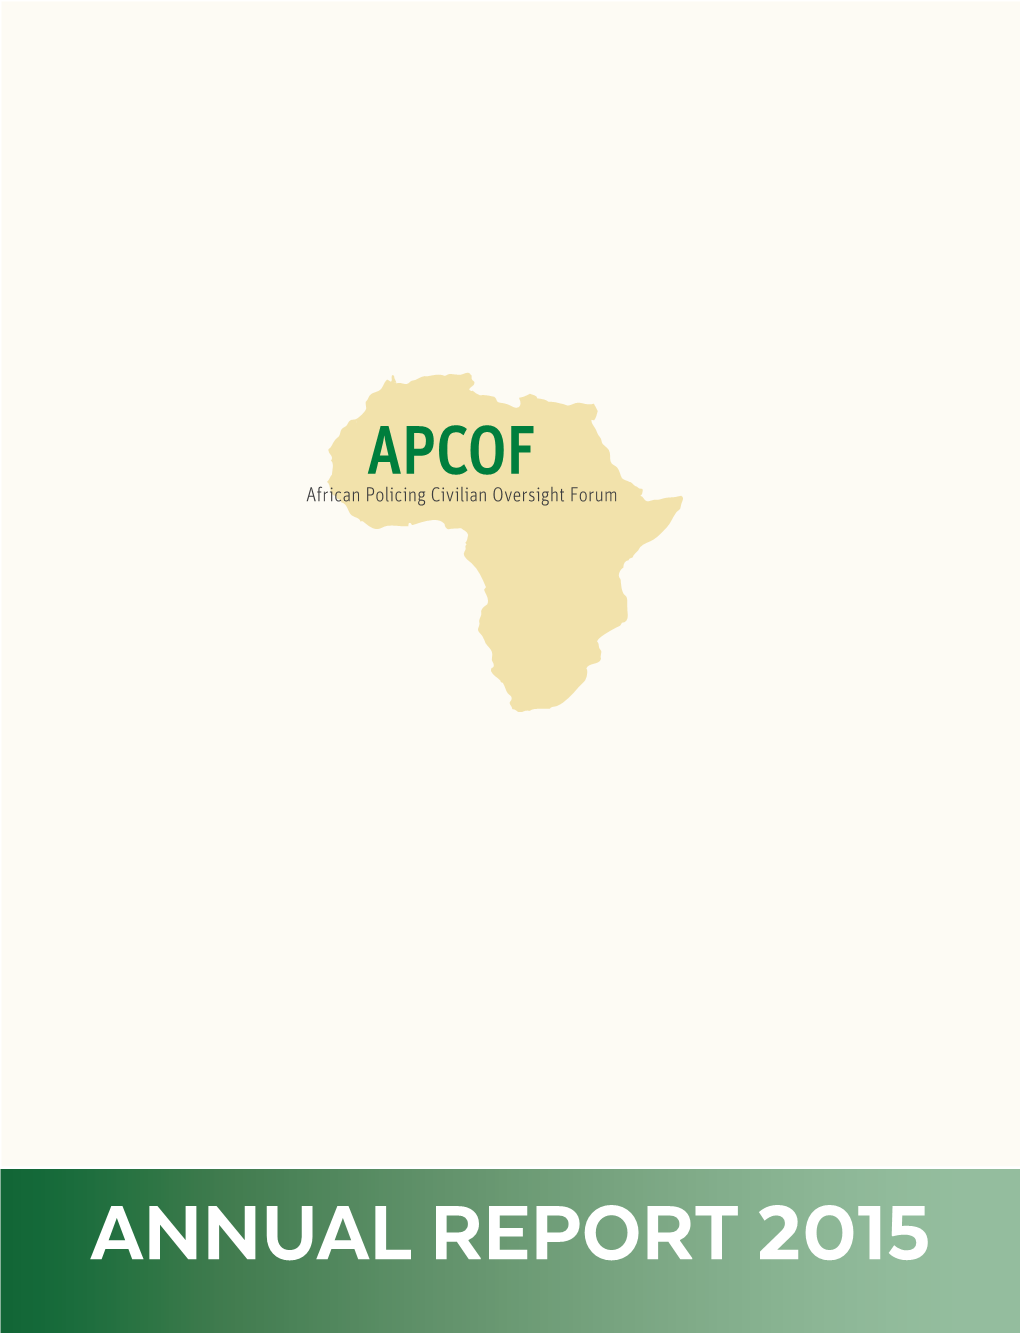 ANNUAL REPORT 2015 APCOF Is a Not-For-Profit Trust Working on Issues of Police Accountability and Governance in Africa